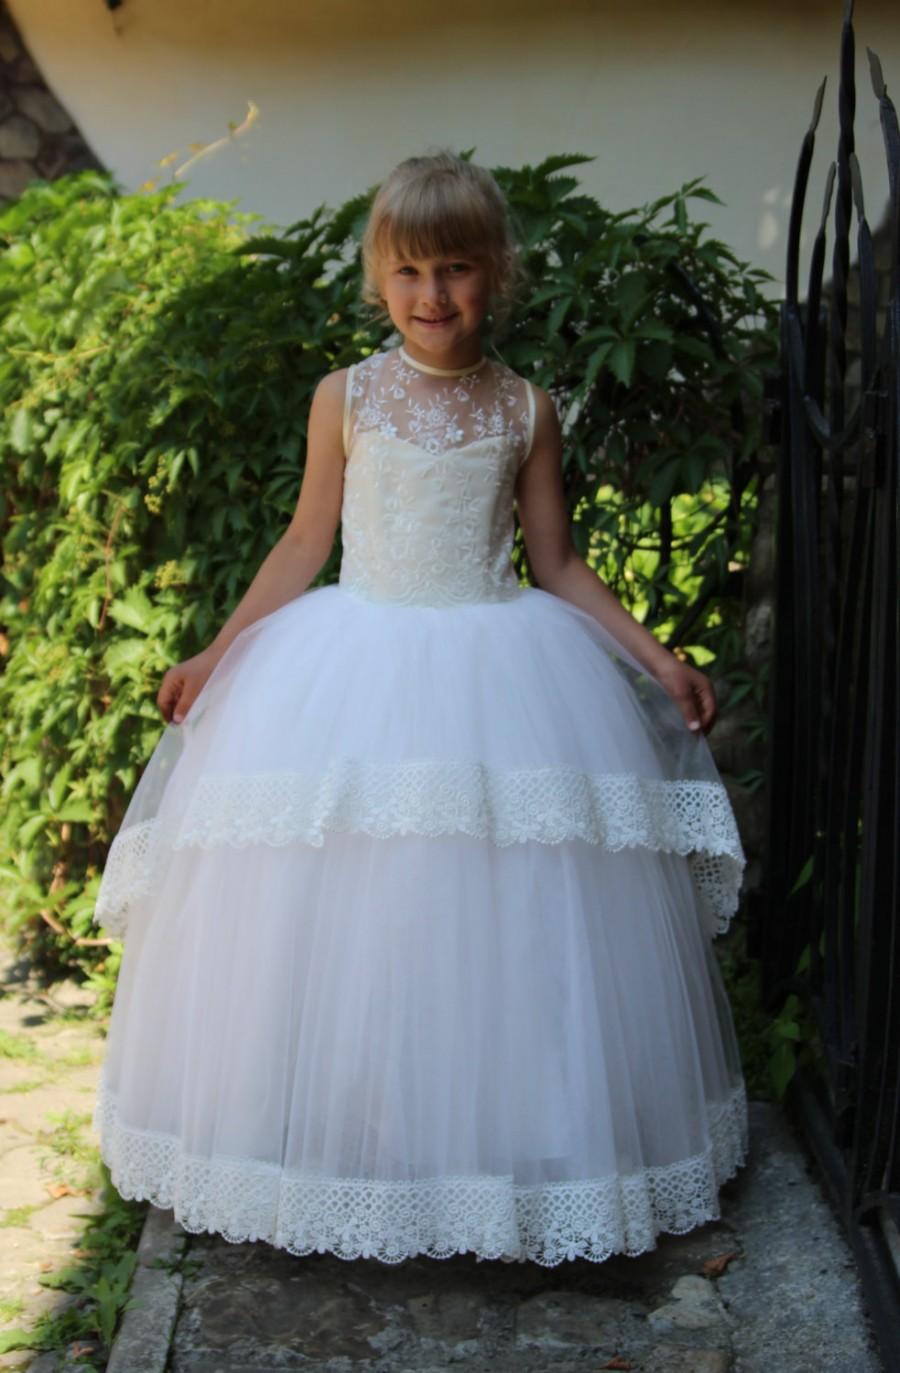 Hochzeit - Lace Ivory Flower Girl Dress - Wedding Party Birthday Peasant Bridesmaid Ivory Lace Dress